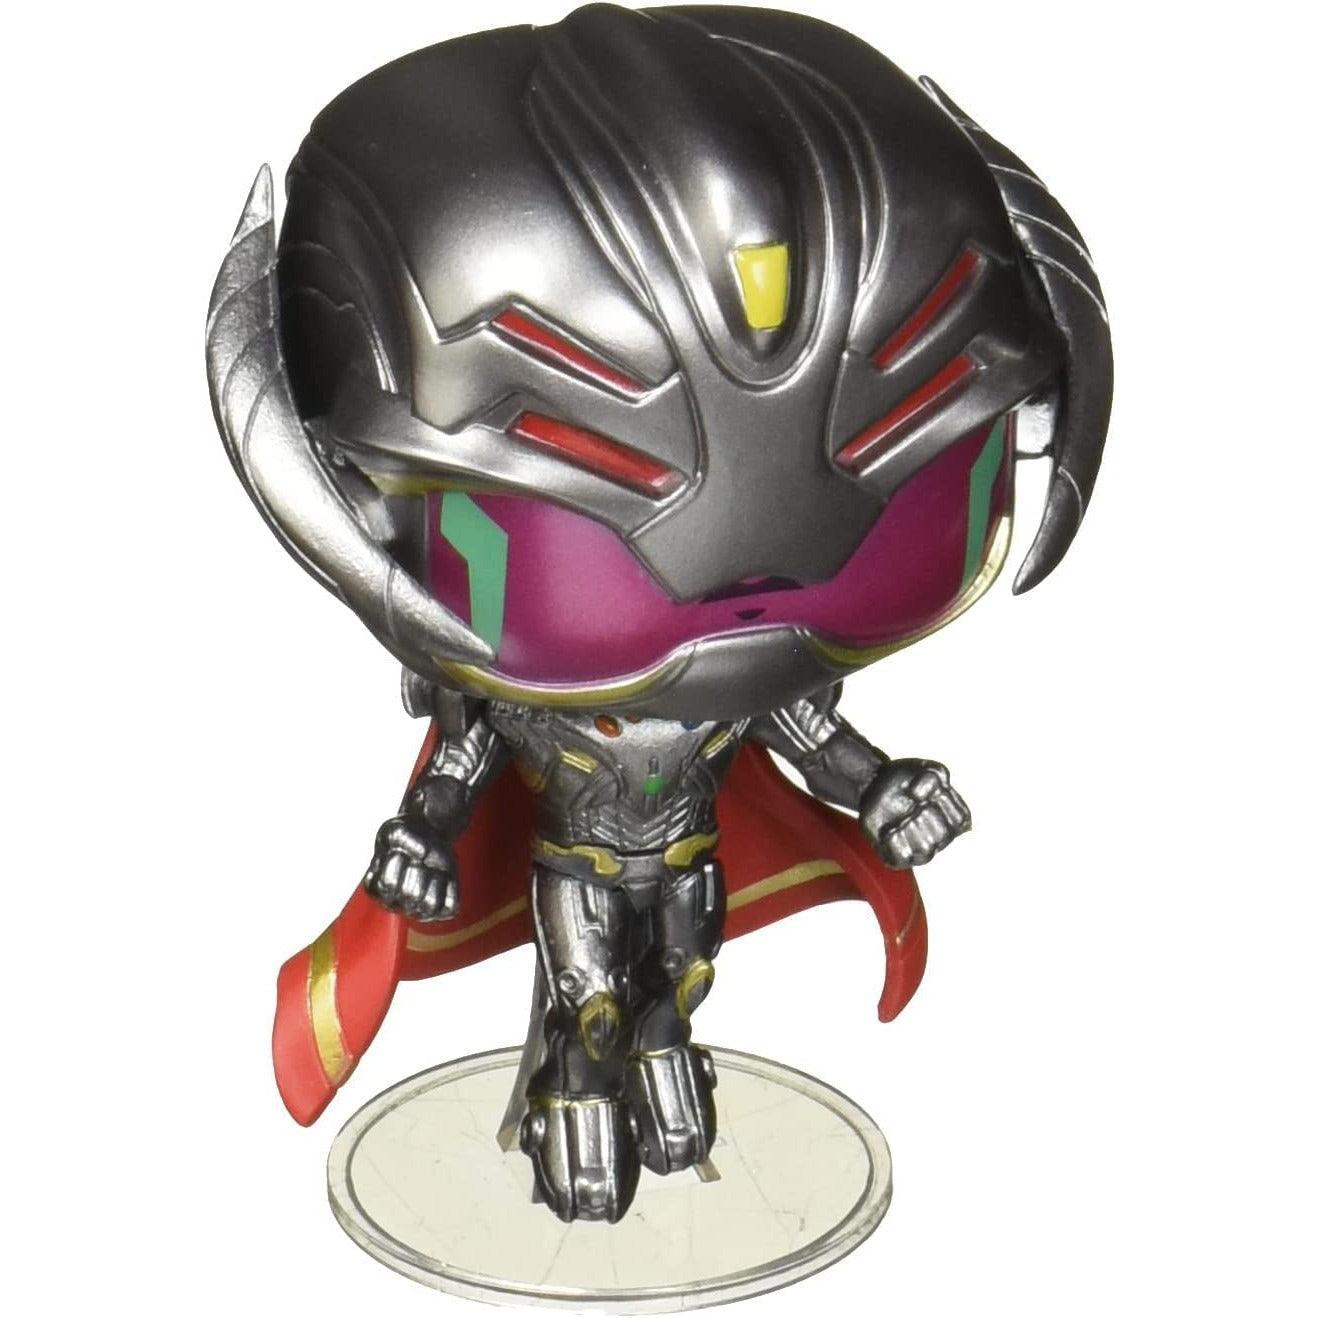 Funko Pop Marvel: What If? - Infinity Ultron - BumbleToys - 18+, Action Figures, Boys, Characters, Funko, Marvel, Pre-Order